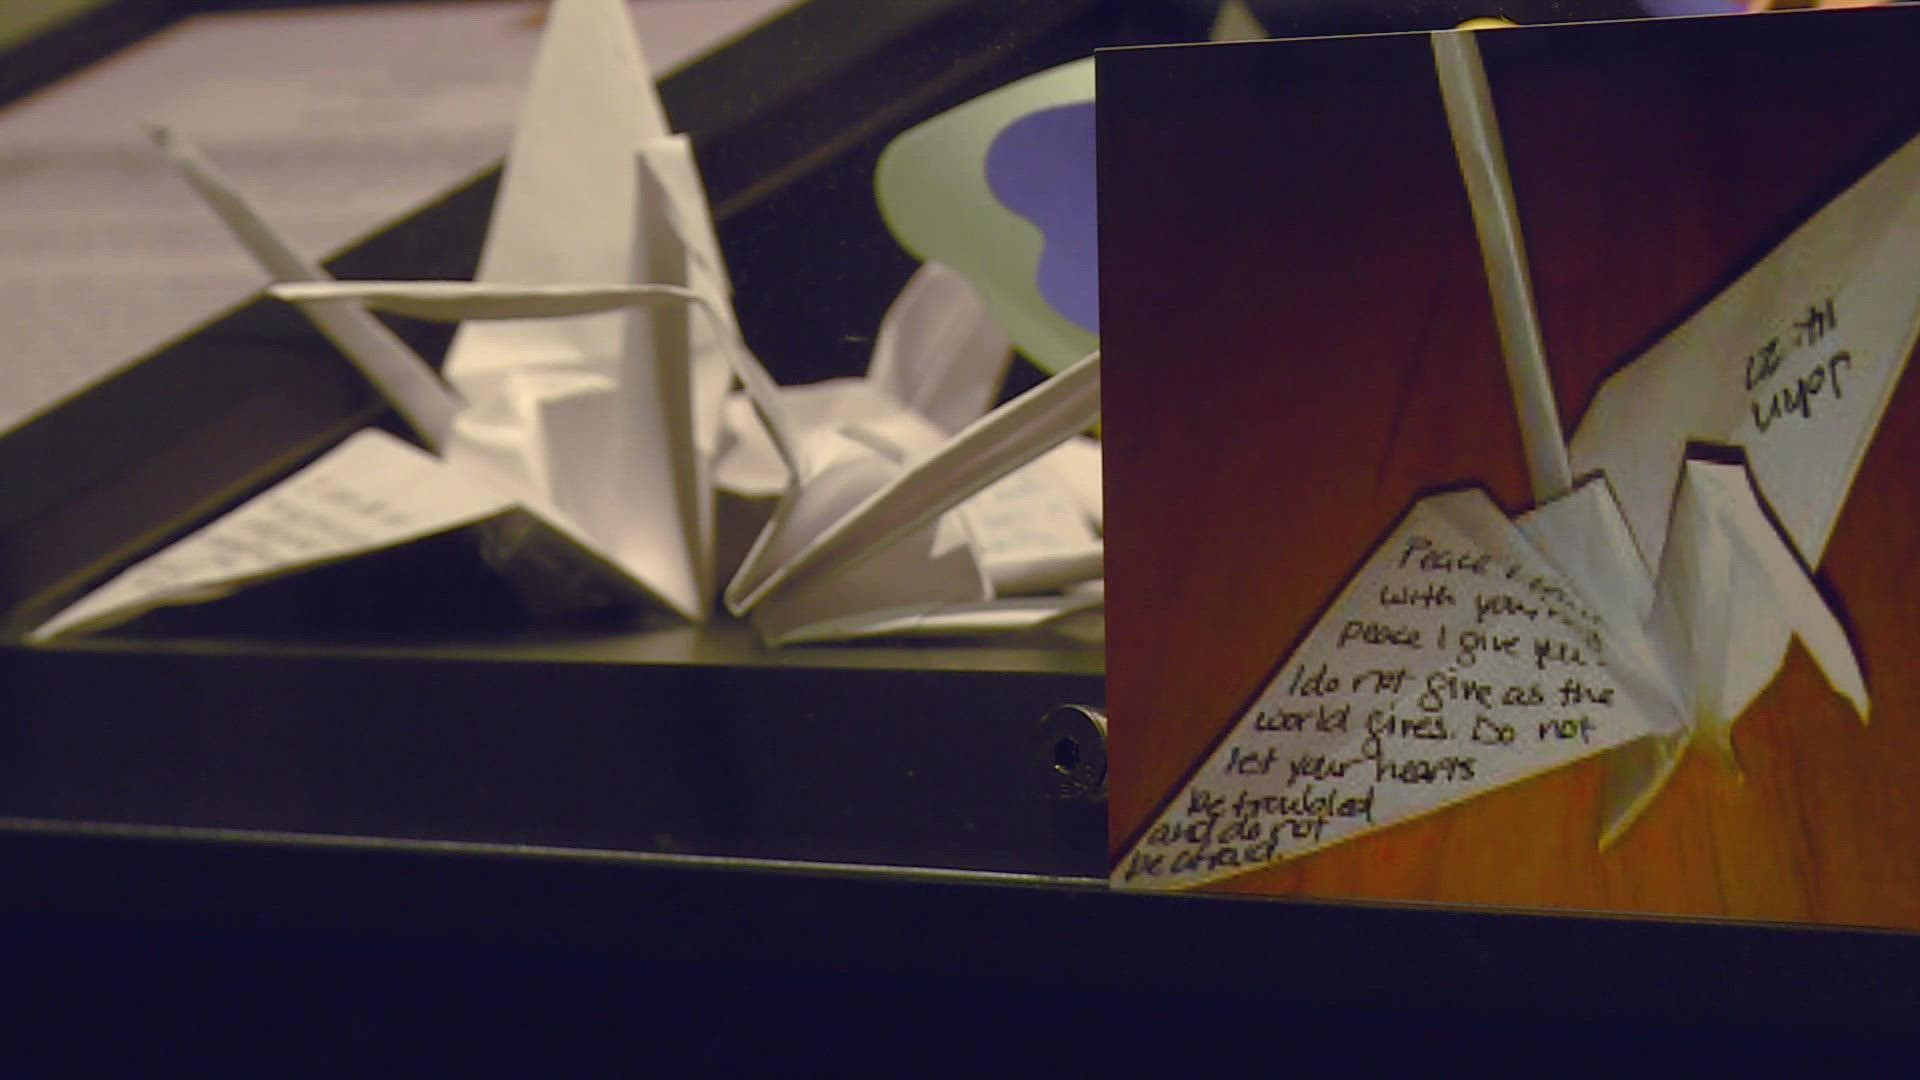 For every mass shooting, the 7/20 Foundation mails paper cranes with words of support to the grieving community.